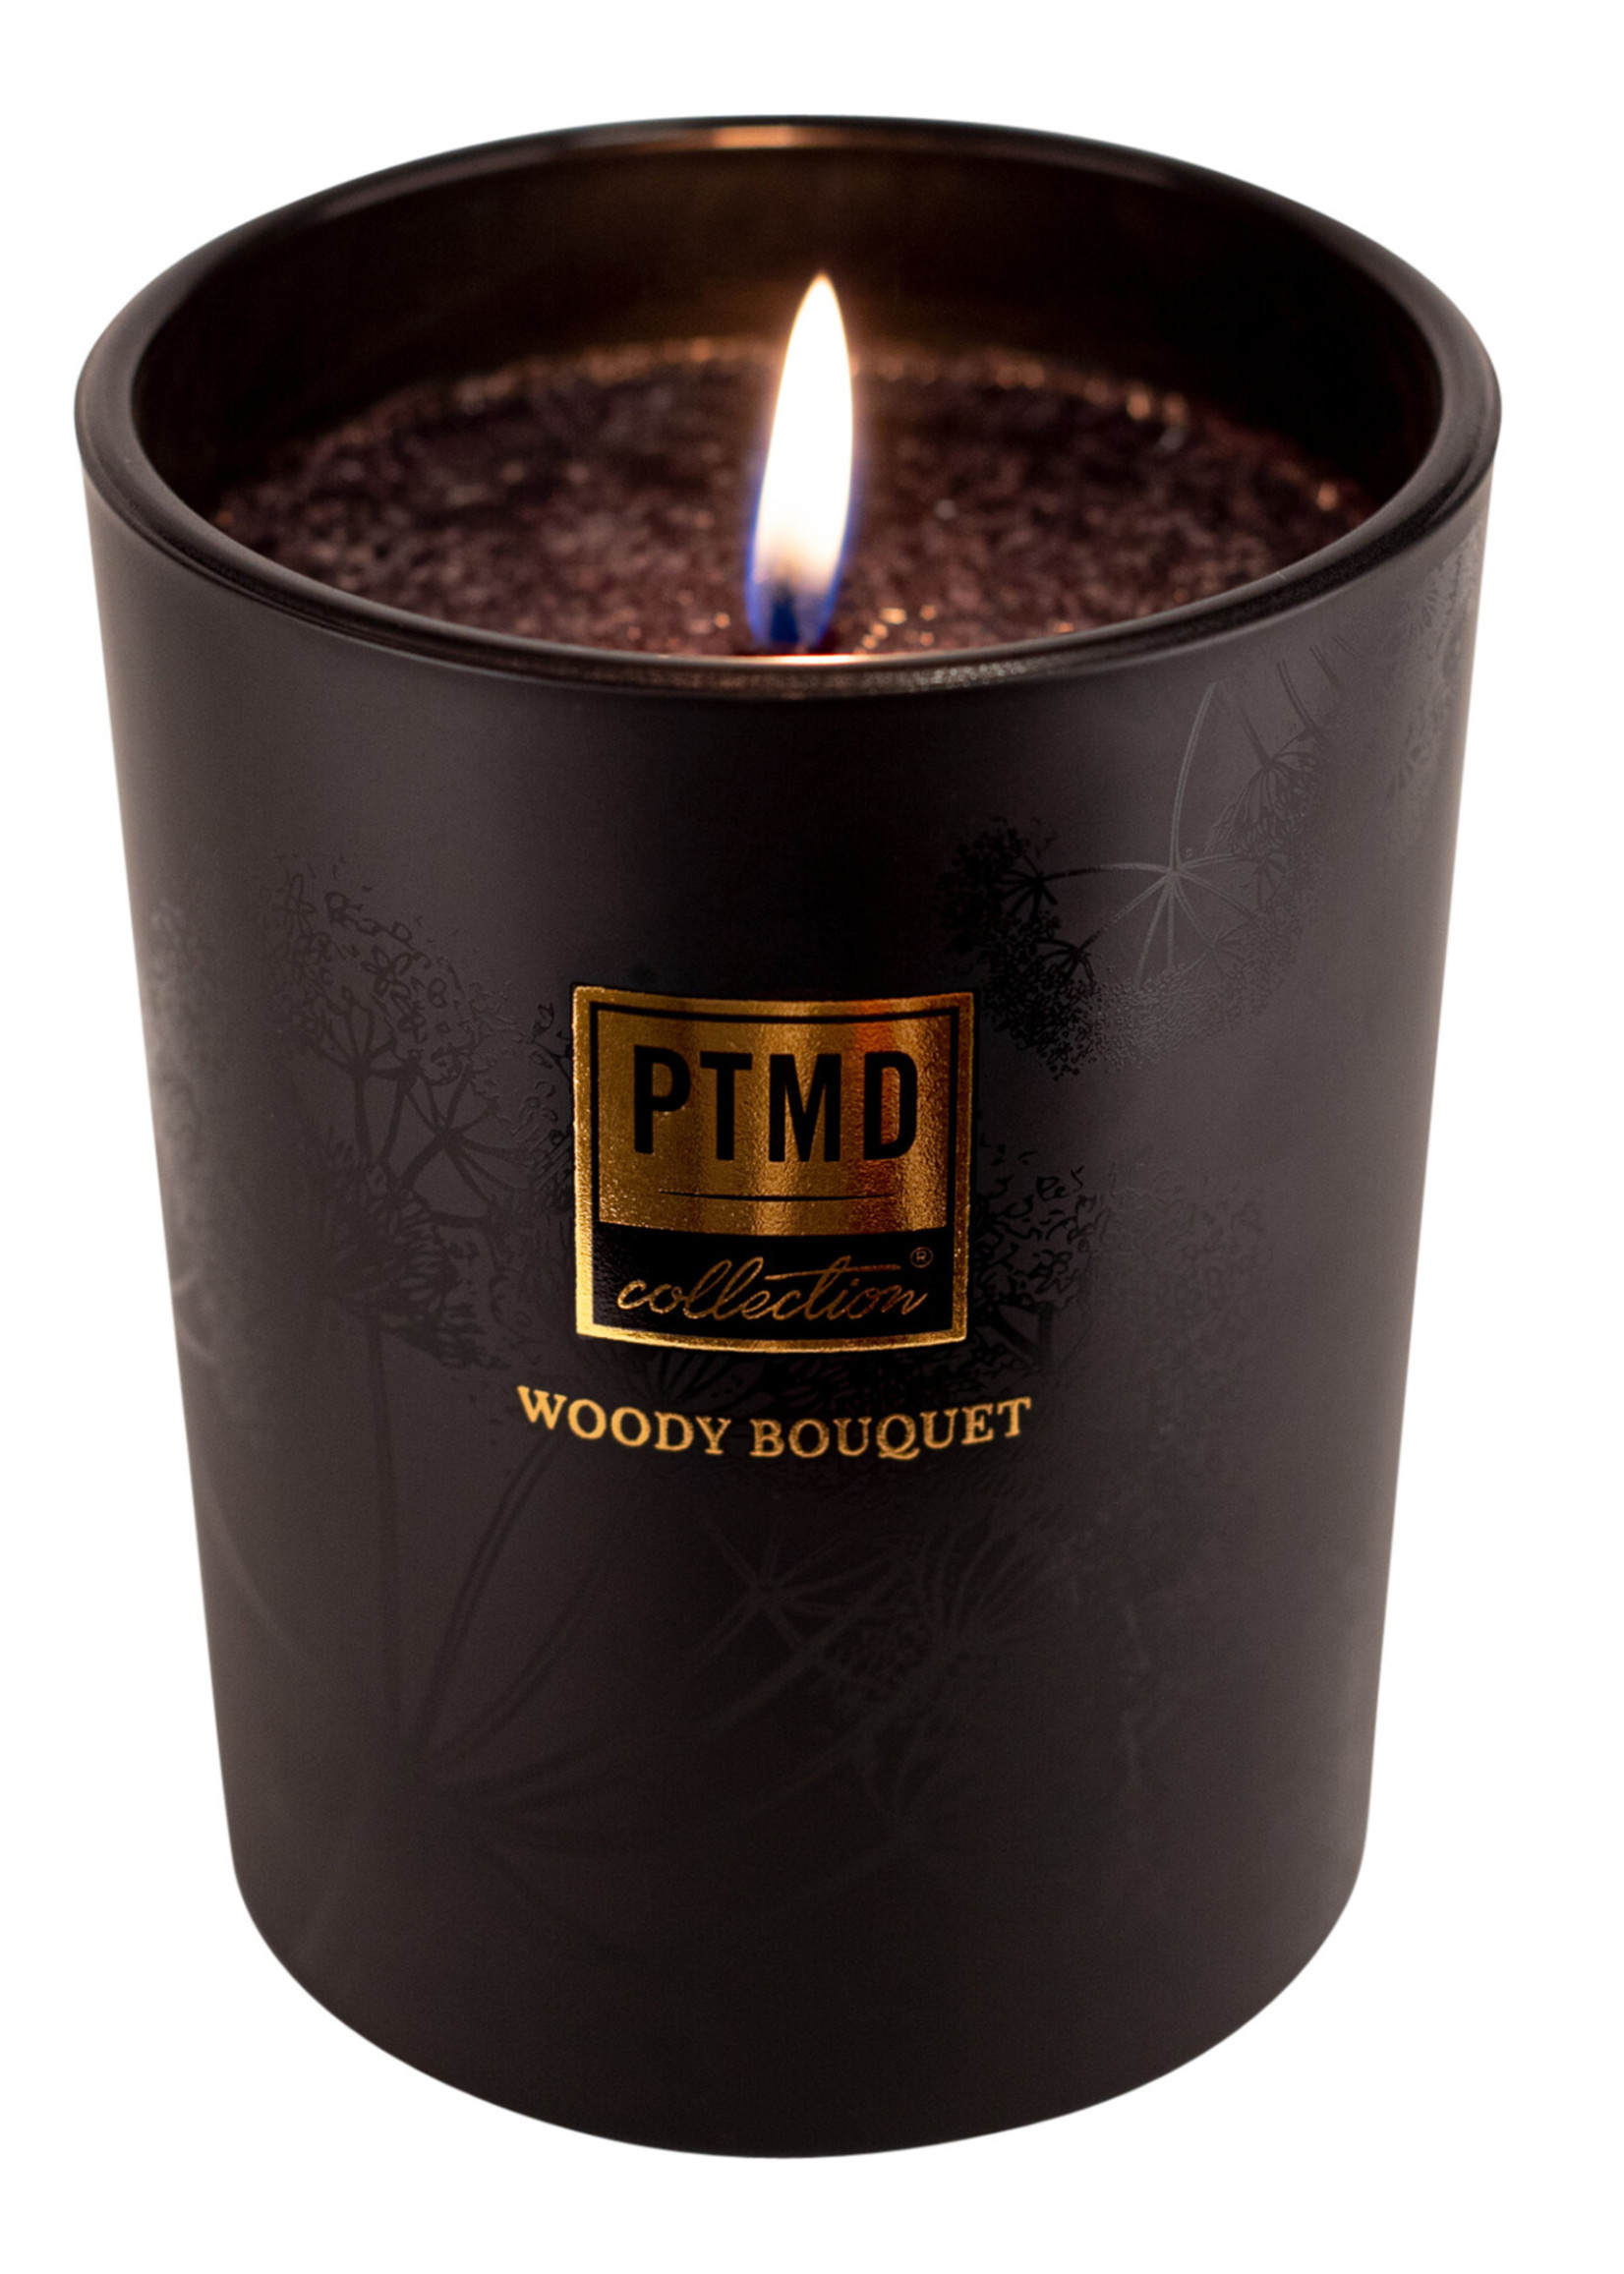 PTMD Woody Bouquet Elements